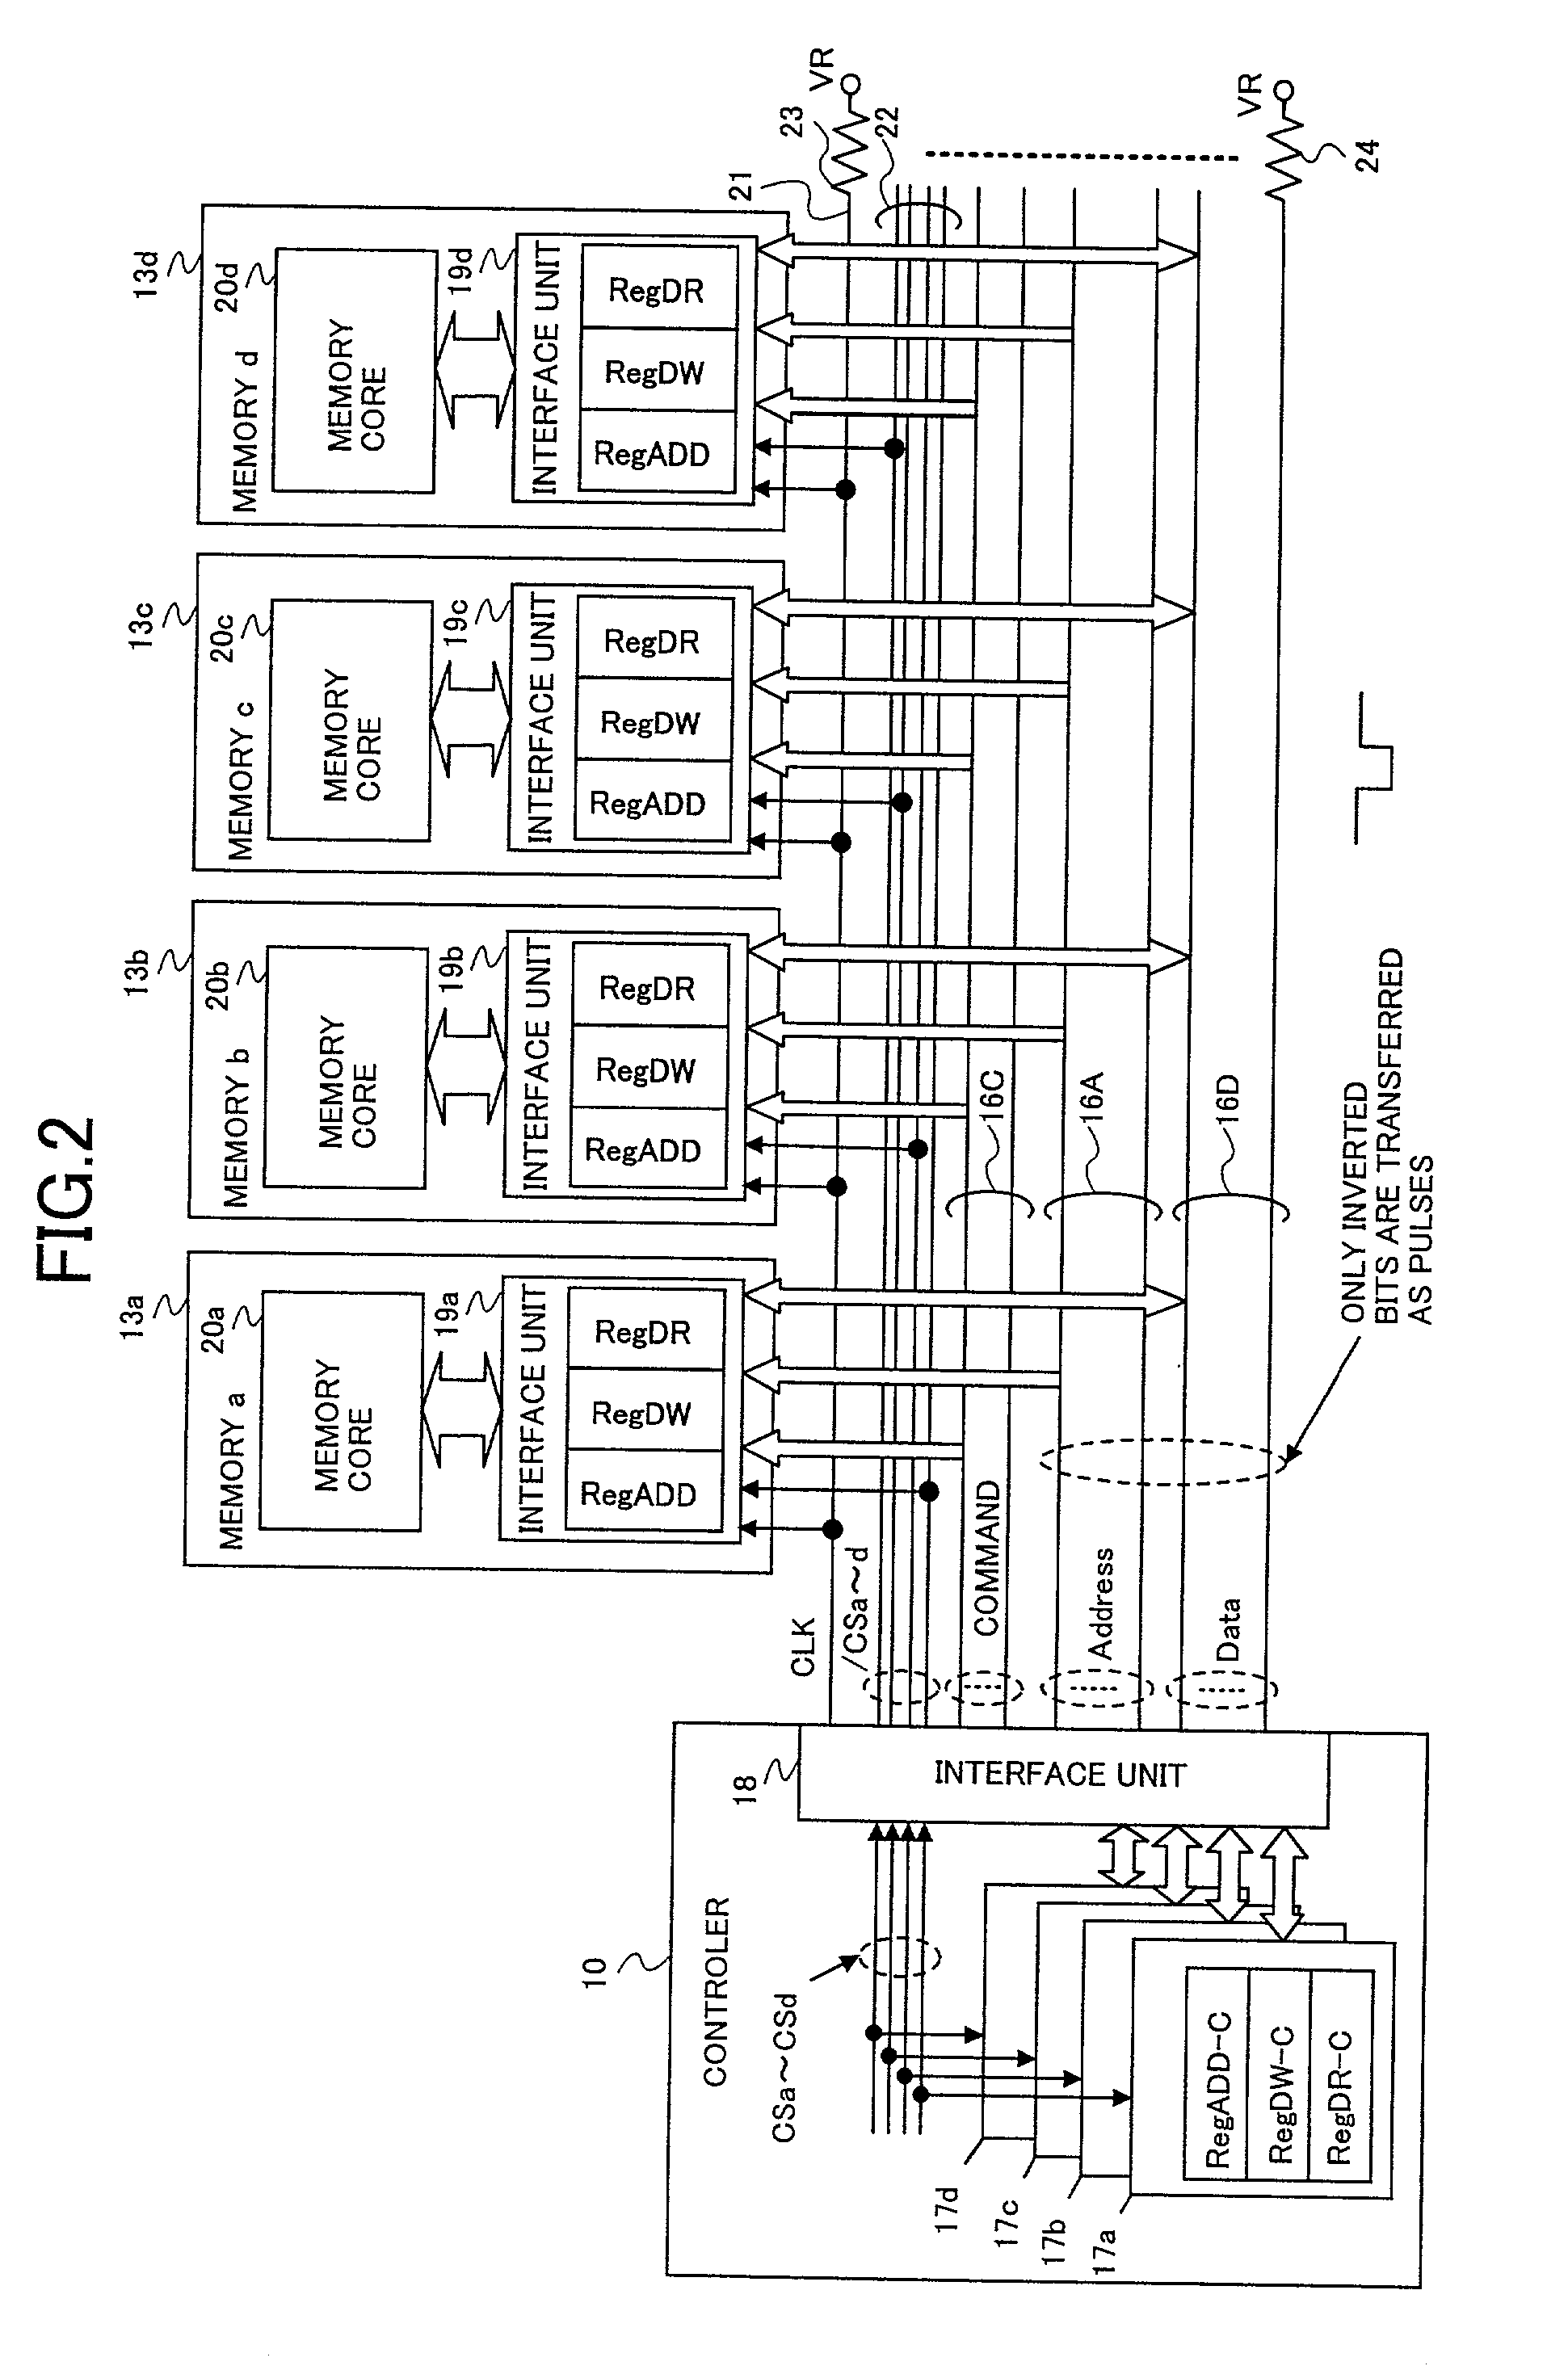 Semiconductor device with circuitry for efficient information exchange